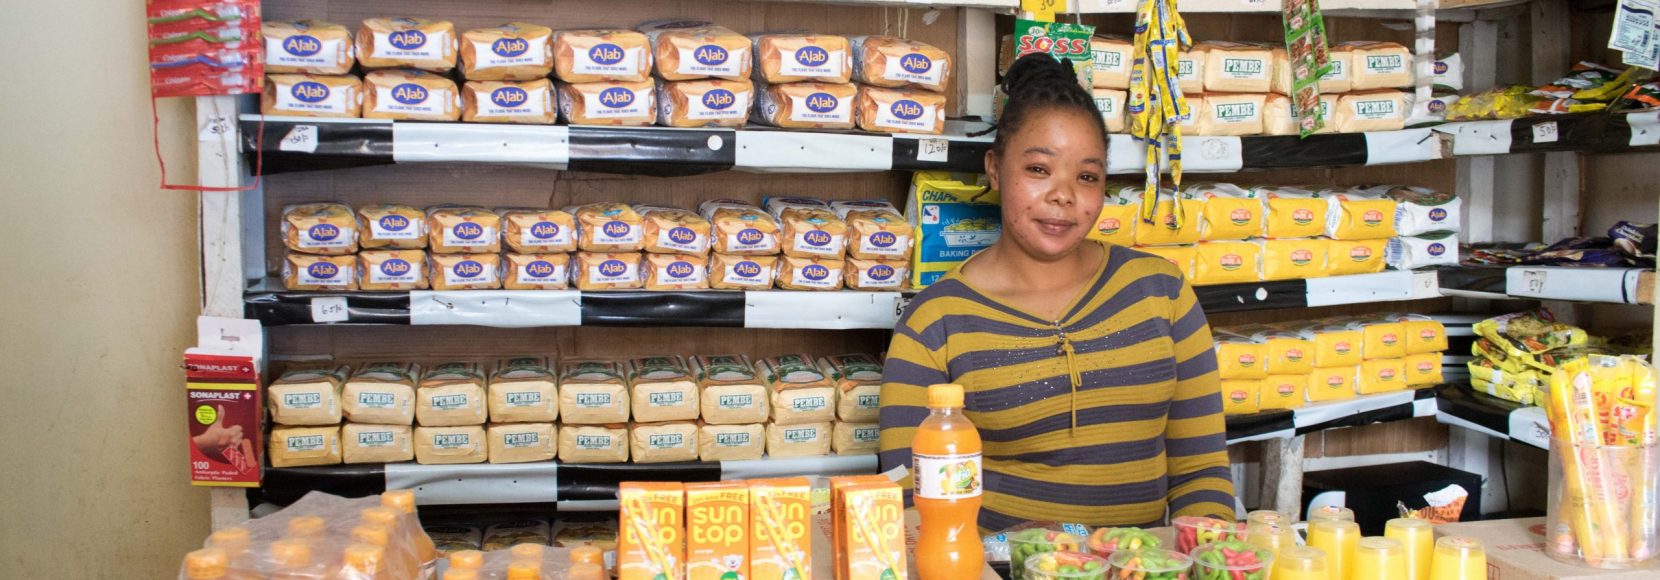 Small businesses in the developing world like Jacinta's faced many challenges throughout the COVID-19 pandemic.